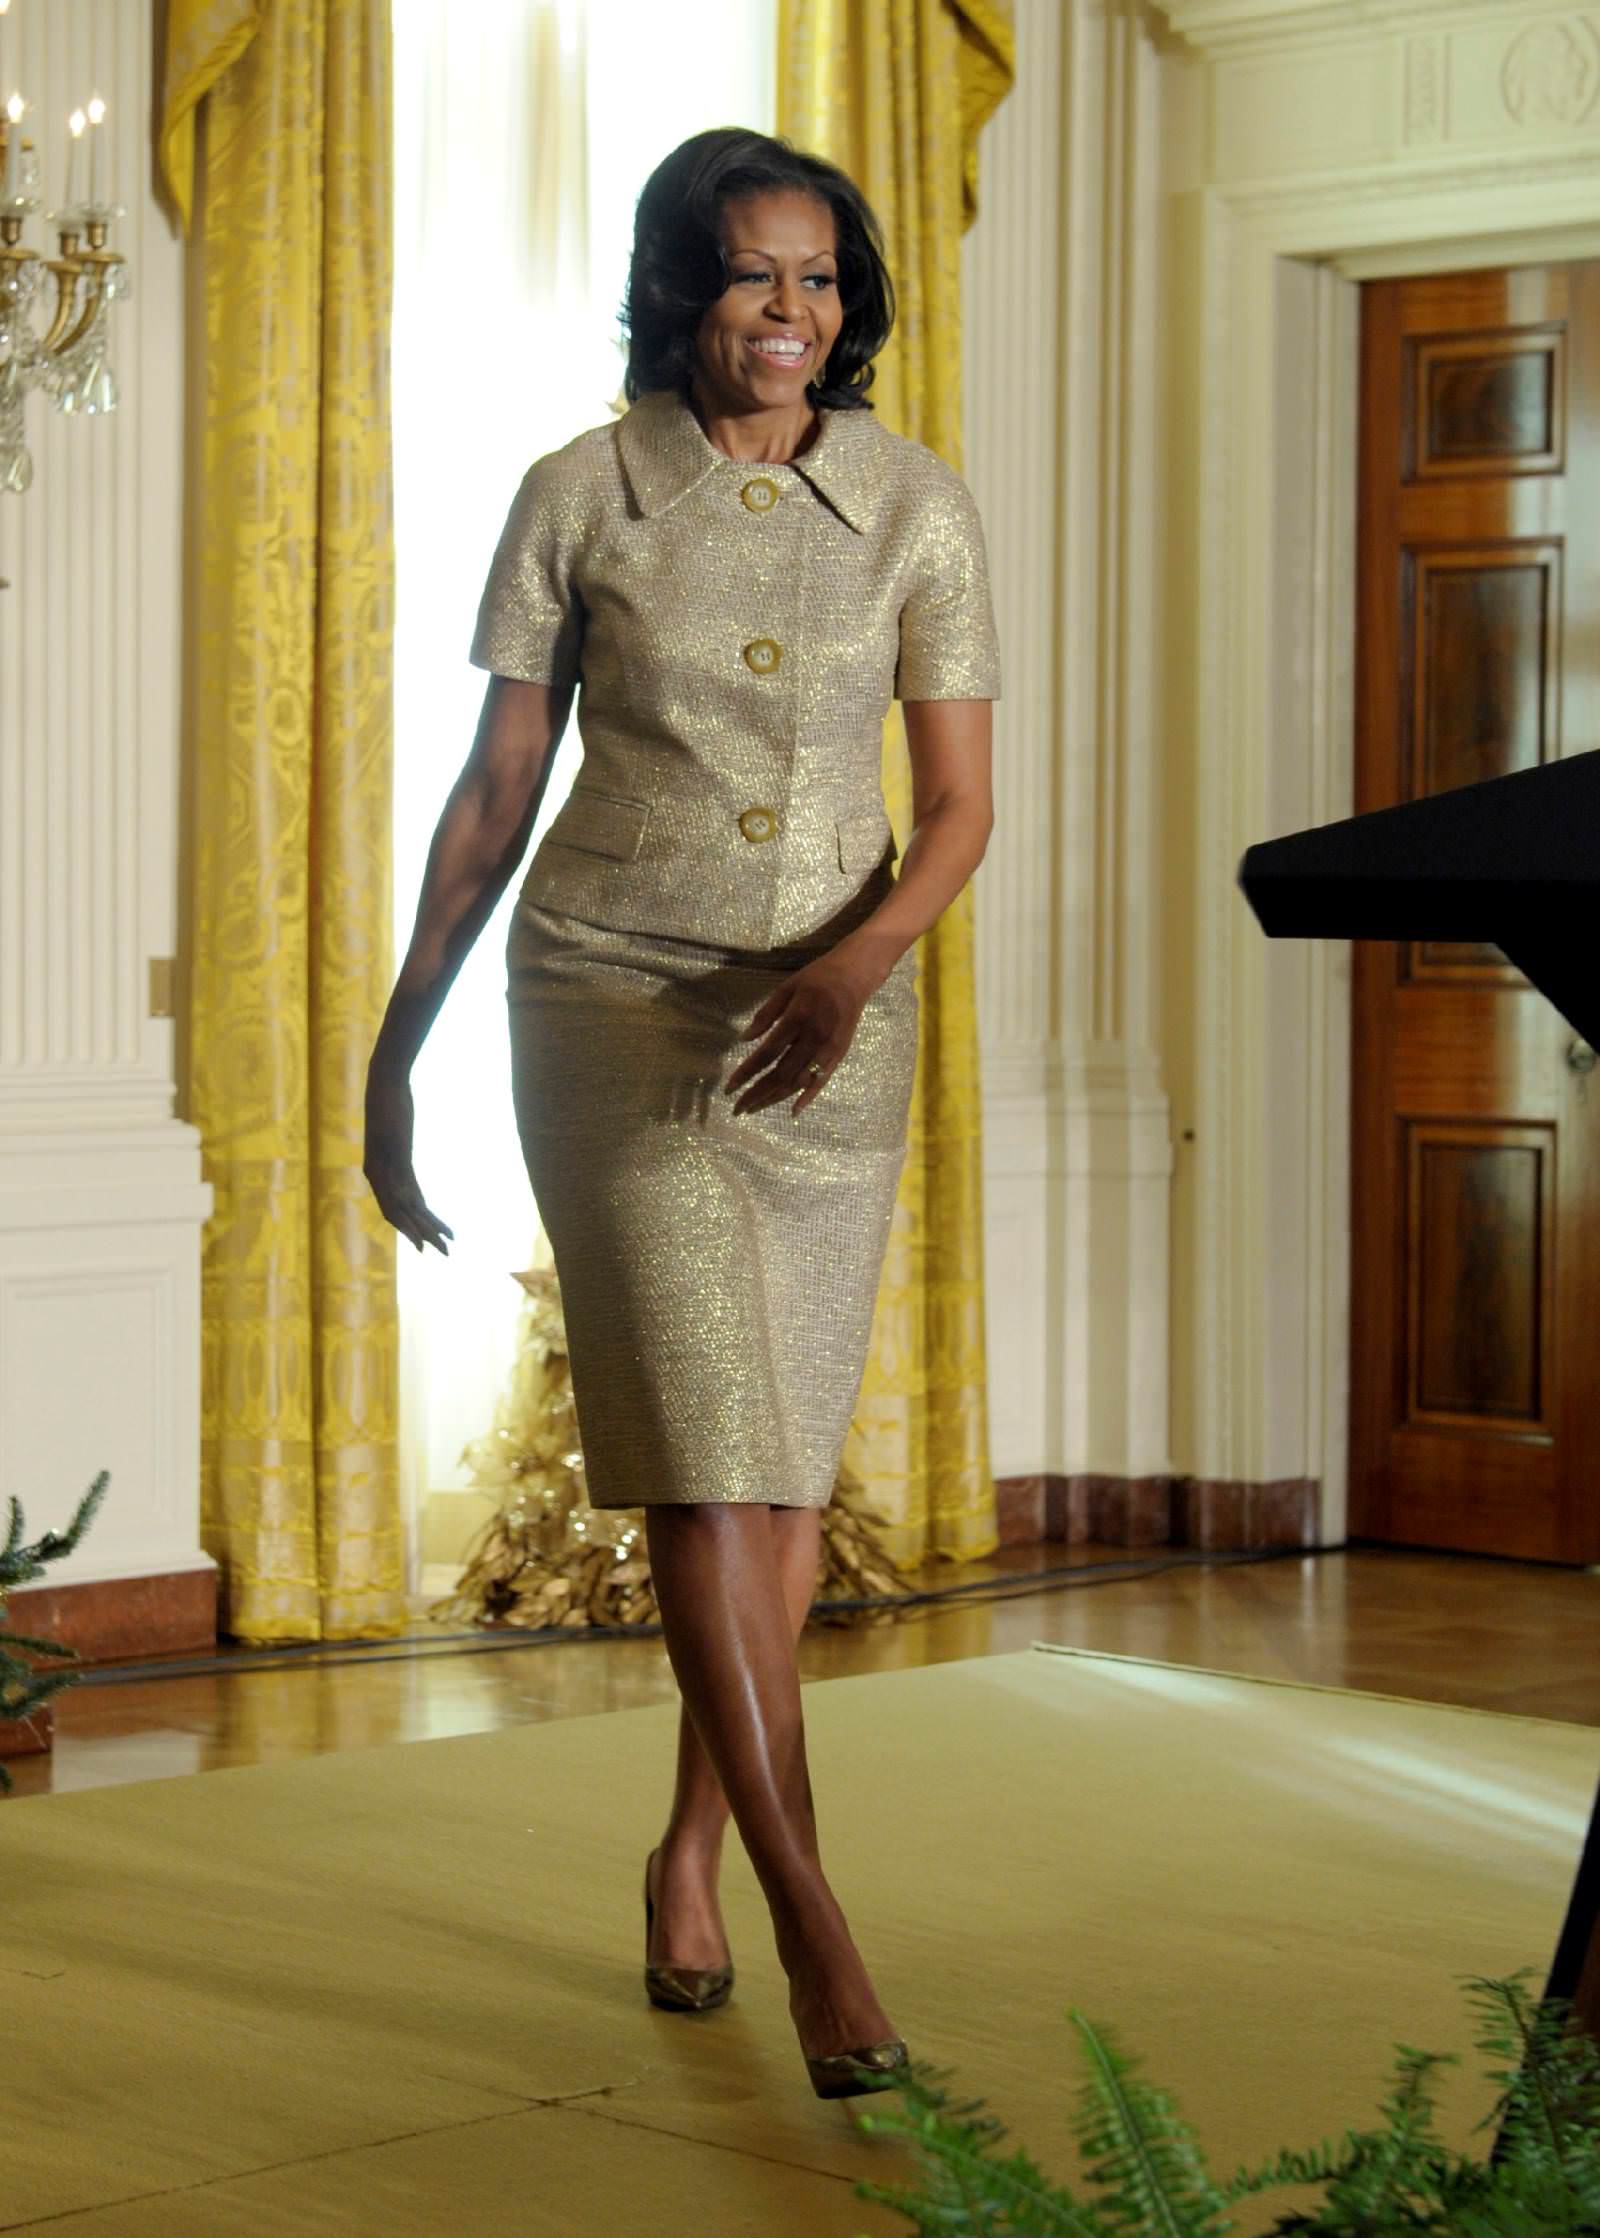 First lady Michelle Obama walks up to the microphone to speaks in the East Room of the White House in Washington, Wednesday, Nov. 28, 2012, to welcome military families during a preview of the White House holiday decorations. The theme for the White House Christmas 2012 is Joy to All. (AP Photo/Susan Walsh)